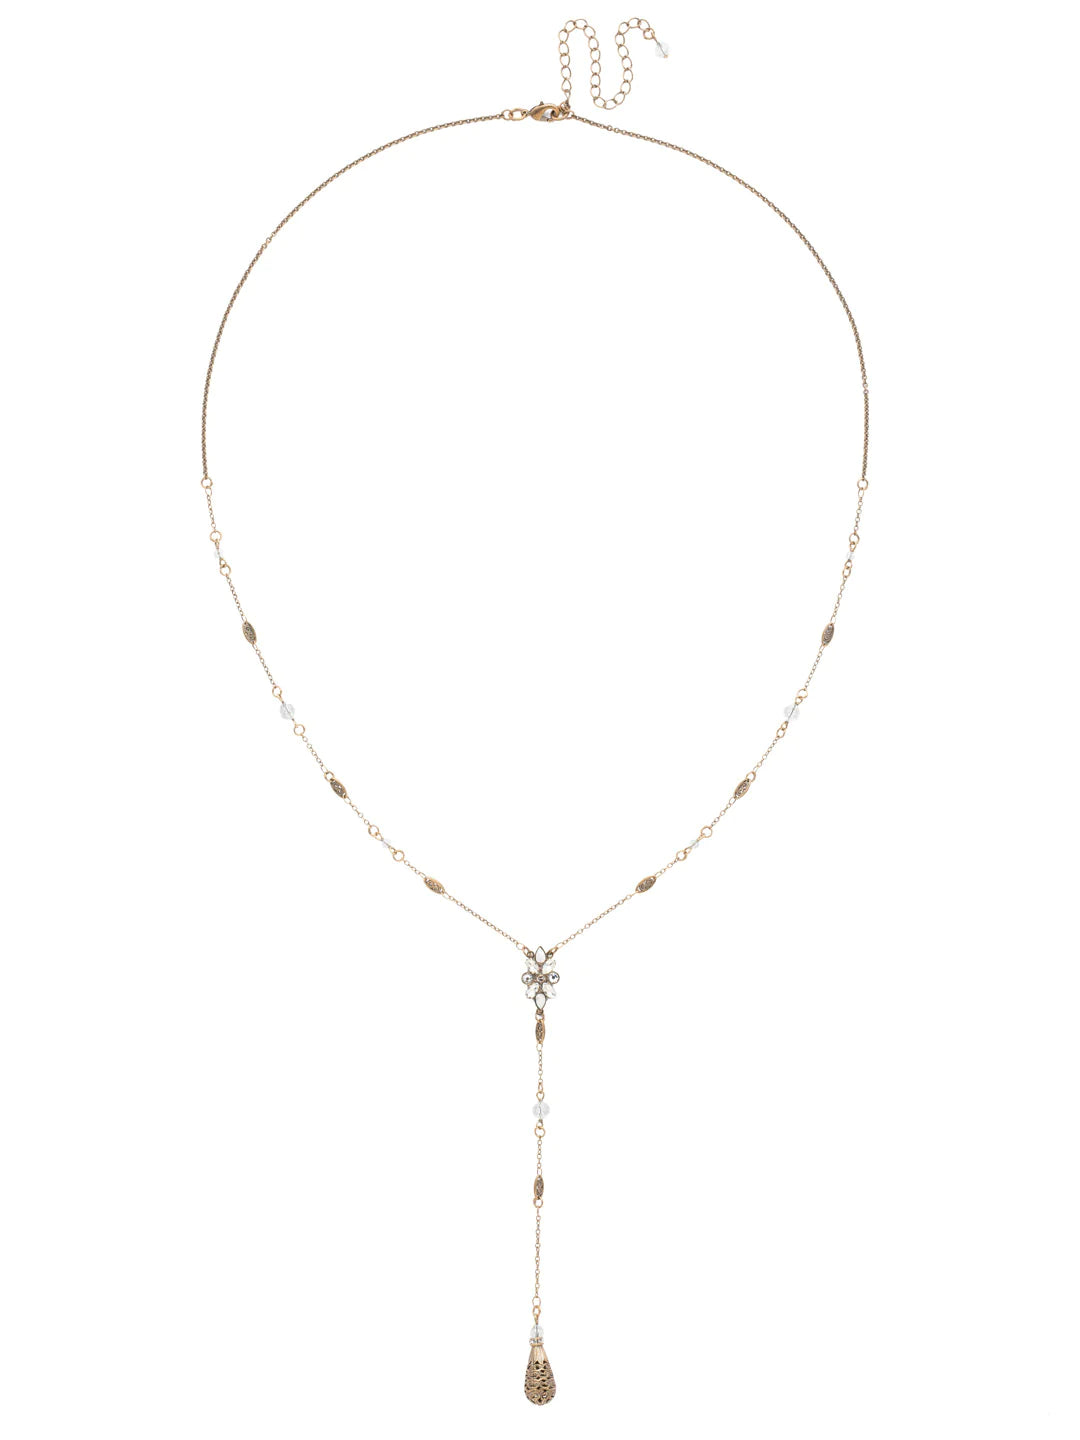 Celestial Filigree Y Chain Necklace | Crystal Collection